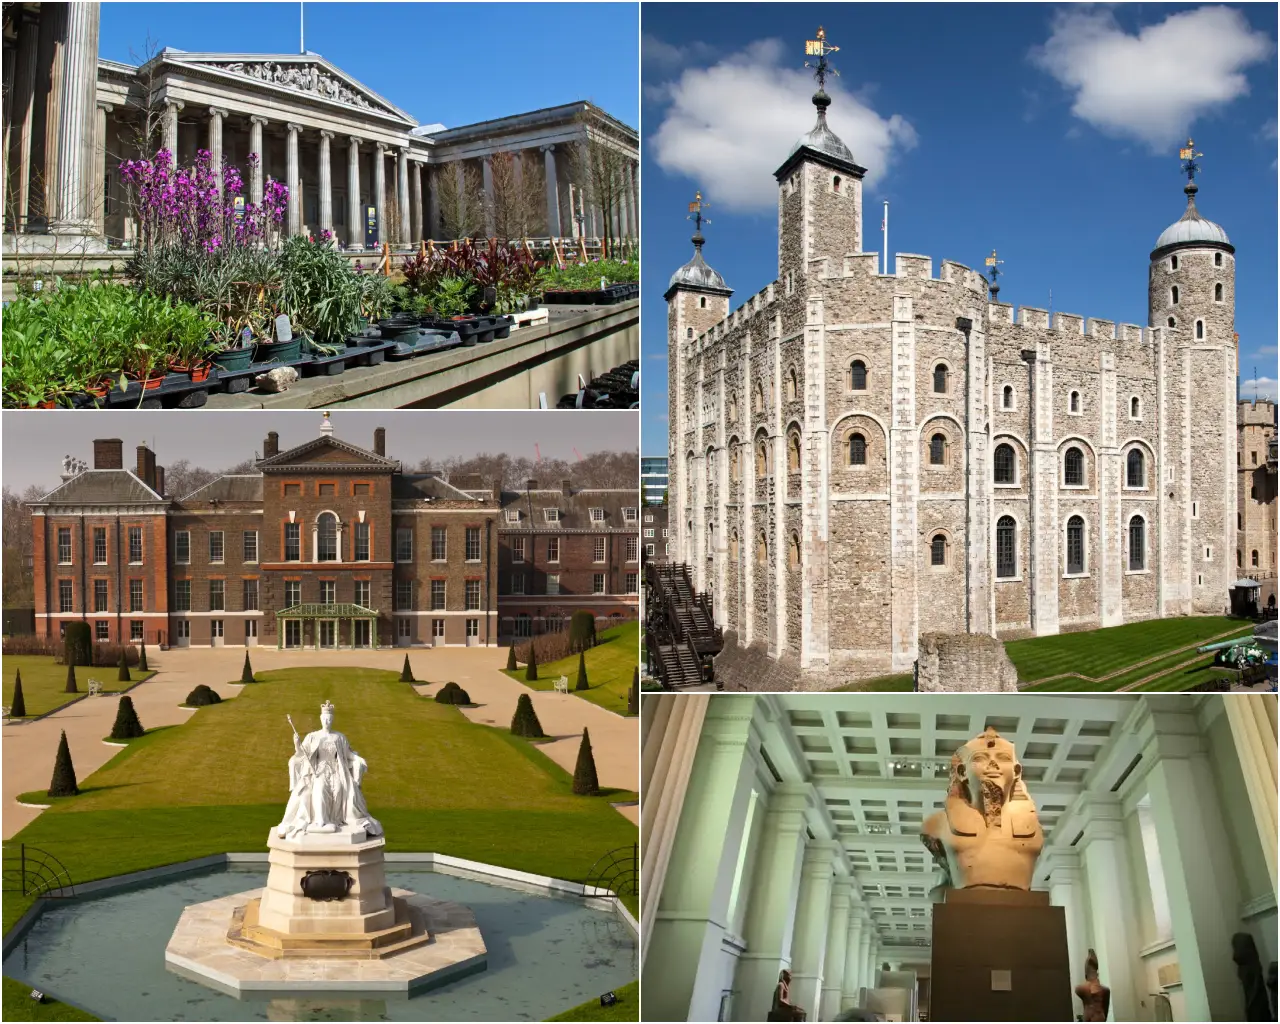 England's top attractions: British Museum and Tower of London